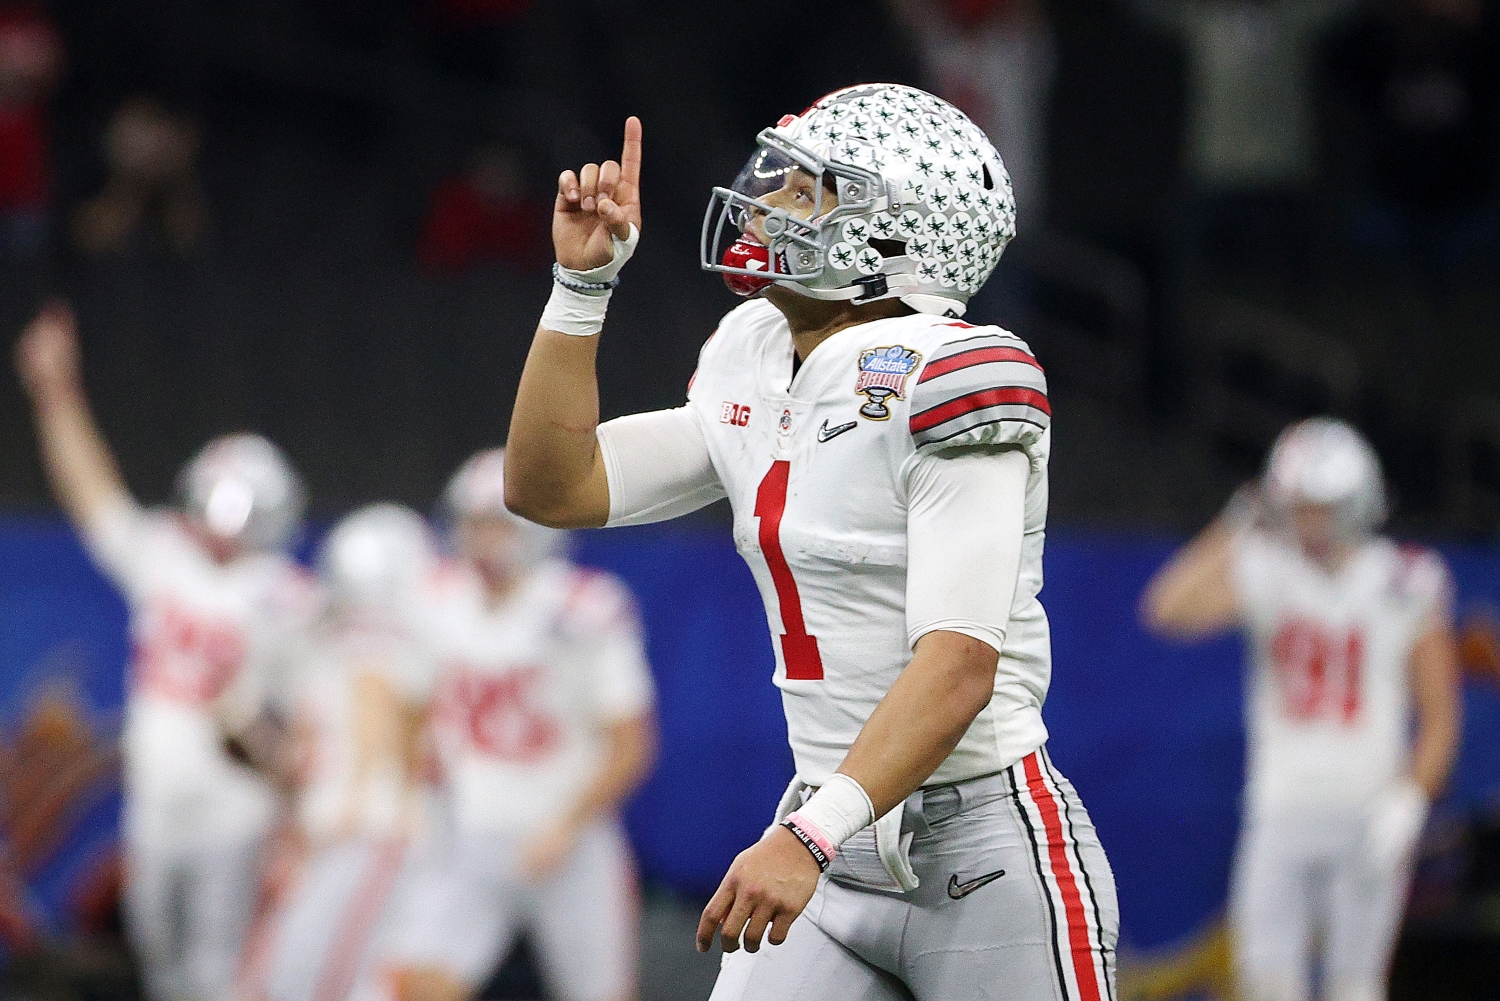 Ohio State quarterback Justin Fields reacts after throwing a touchdown pass during the 2021 College Football Playoff semifinal on New Year's Day.